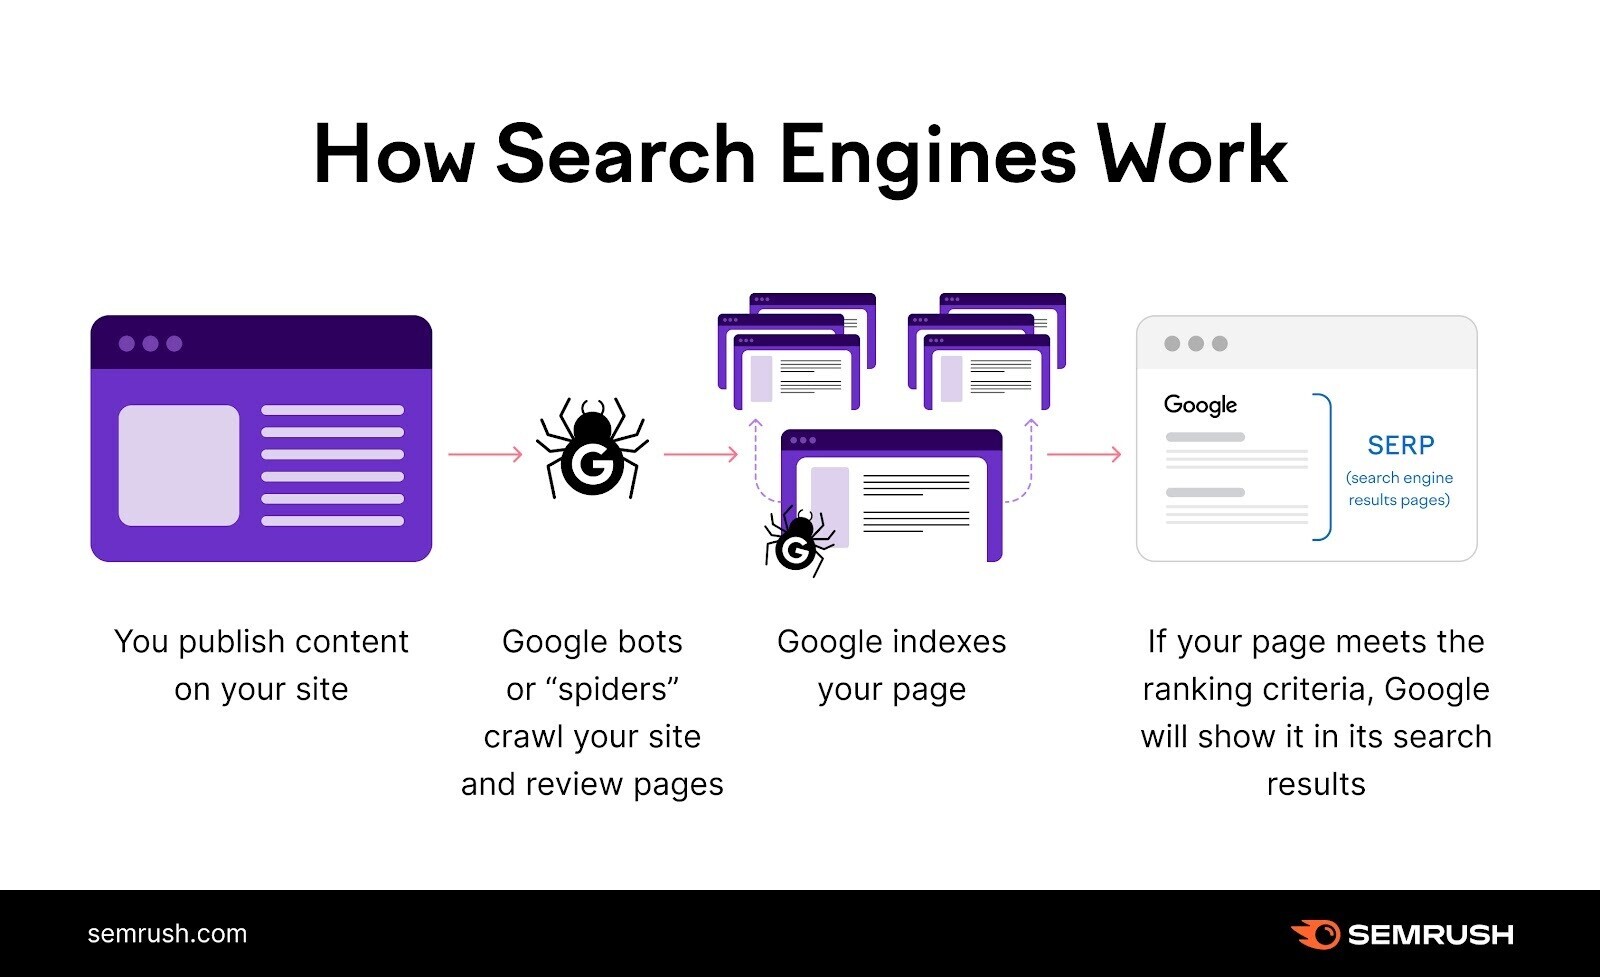 infographic explaining "How search engines work"